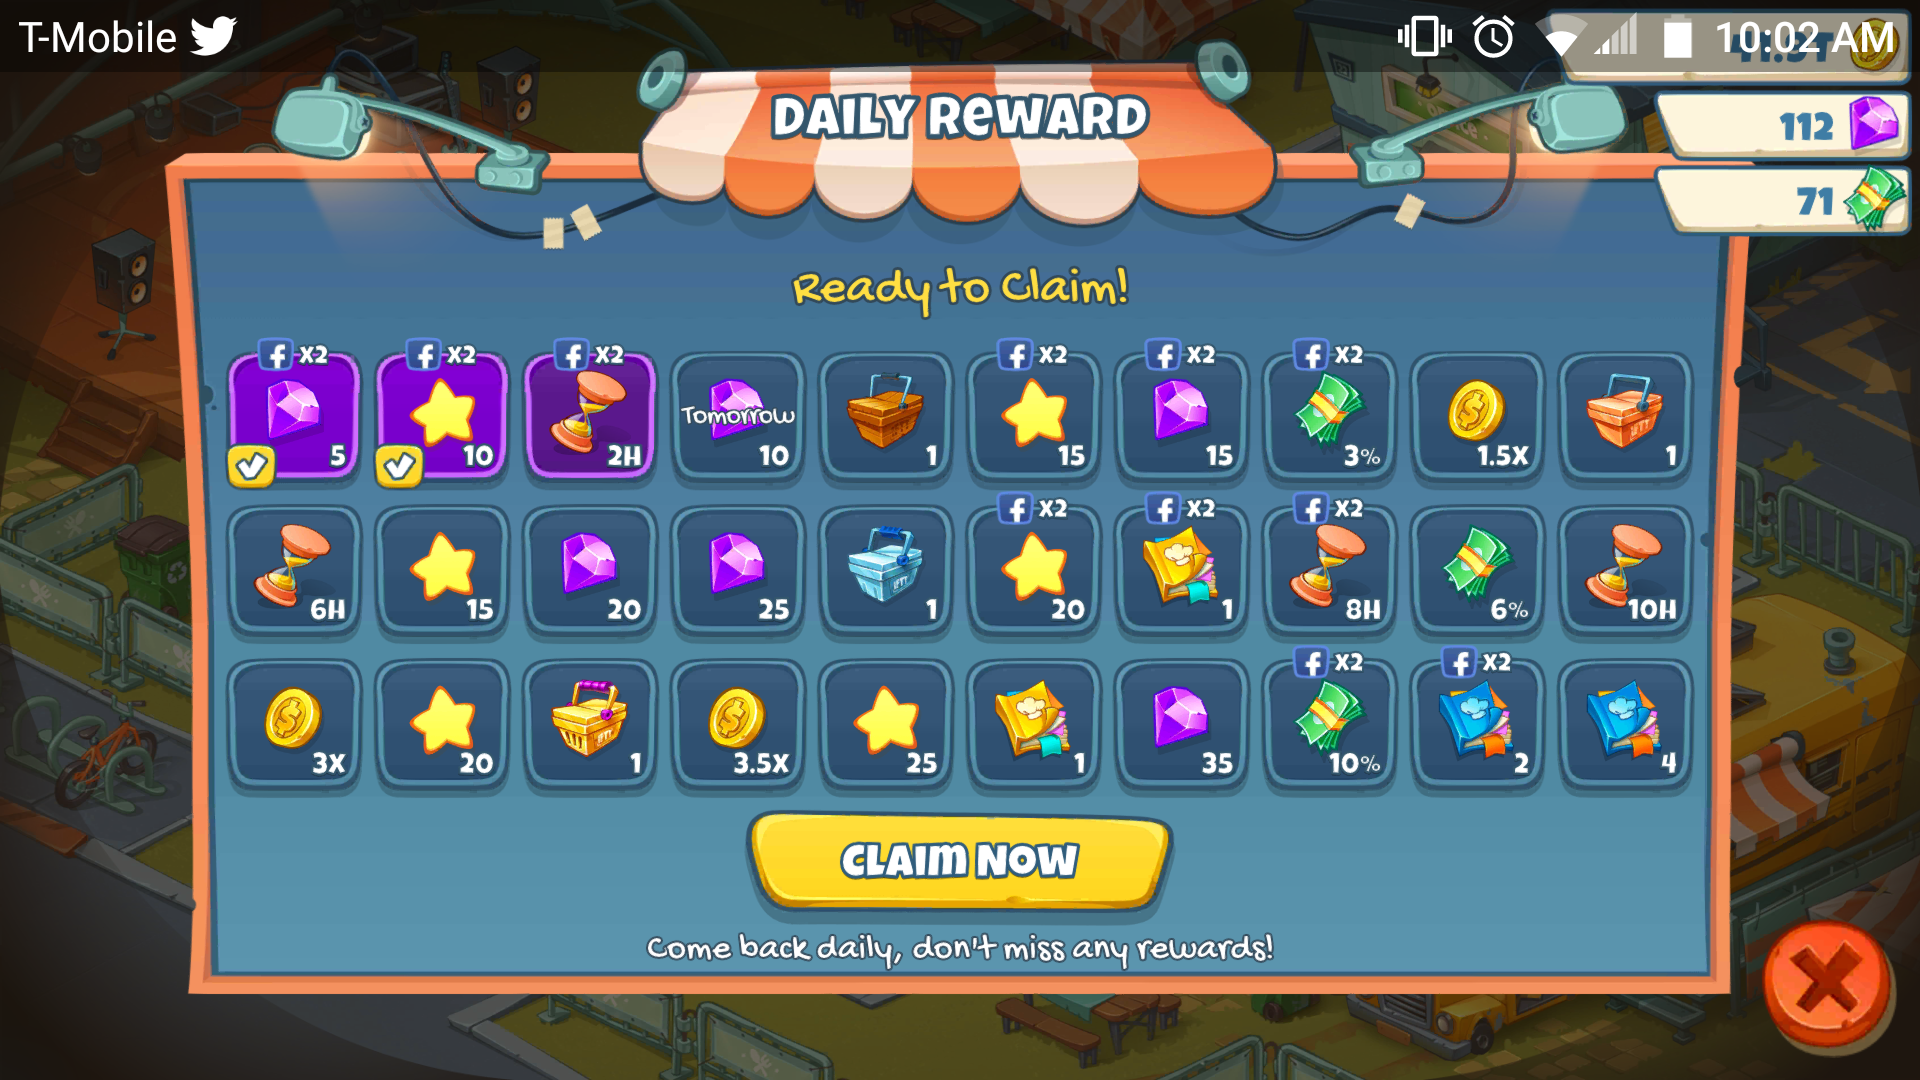 DailyRewards.png